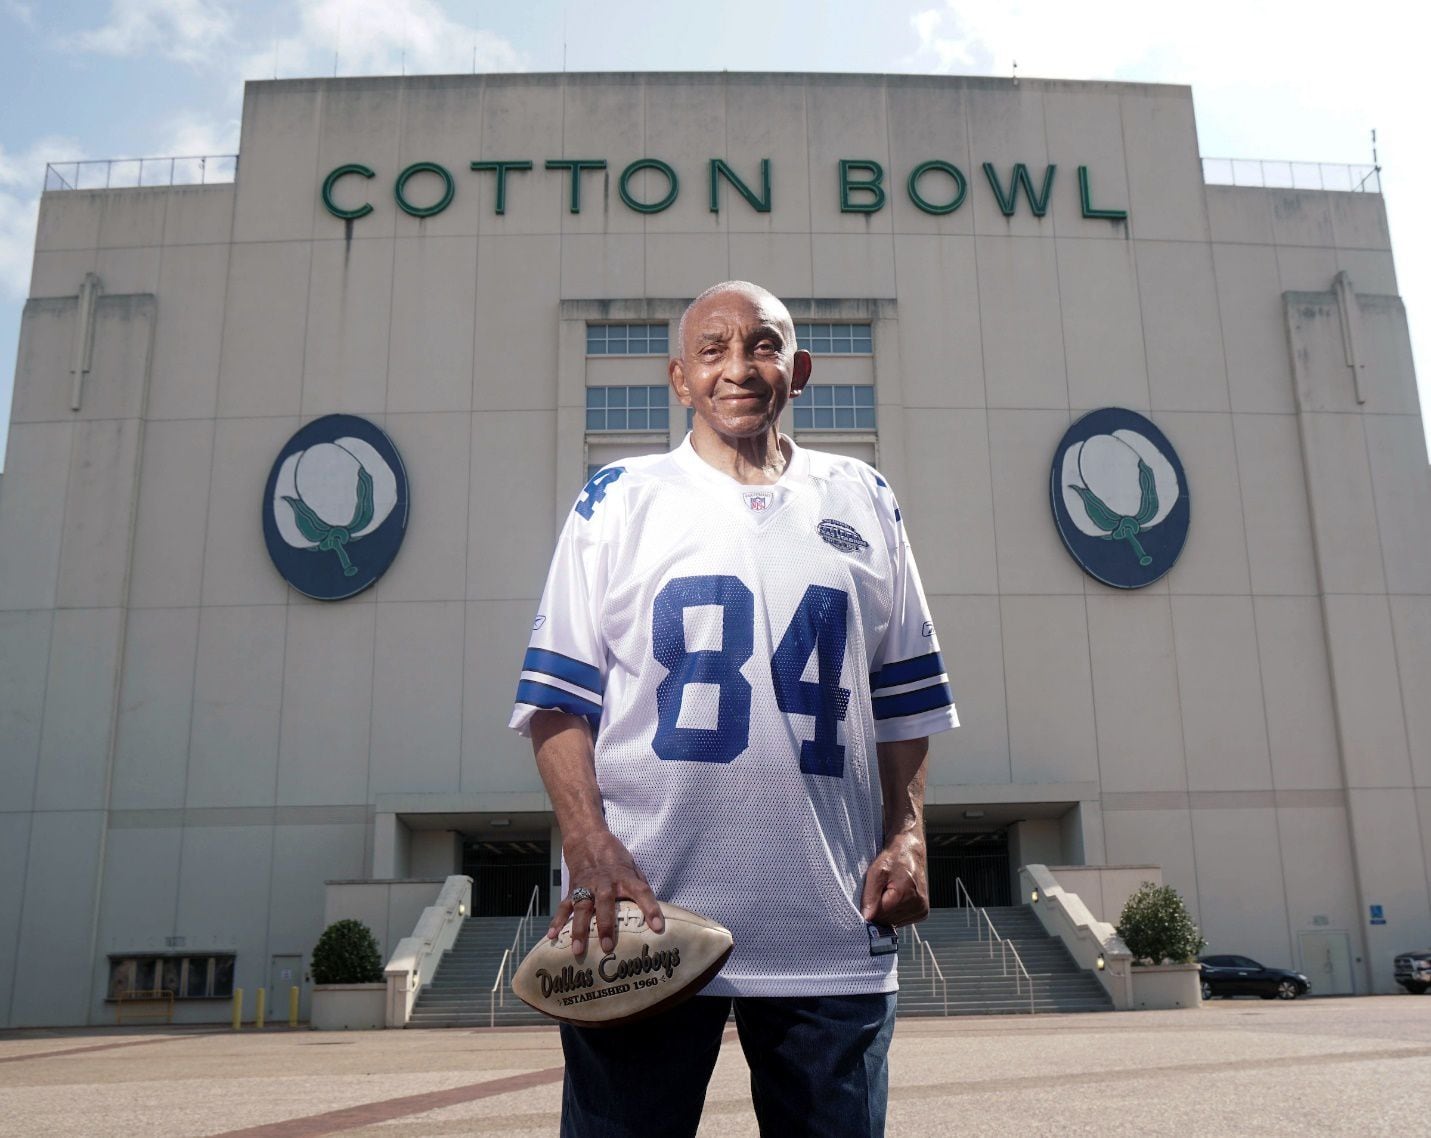 Pettis Norman was photographed in front of the Cotton Bowl in August 2021.